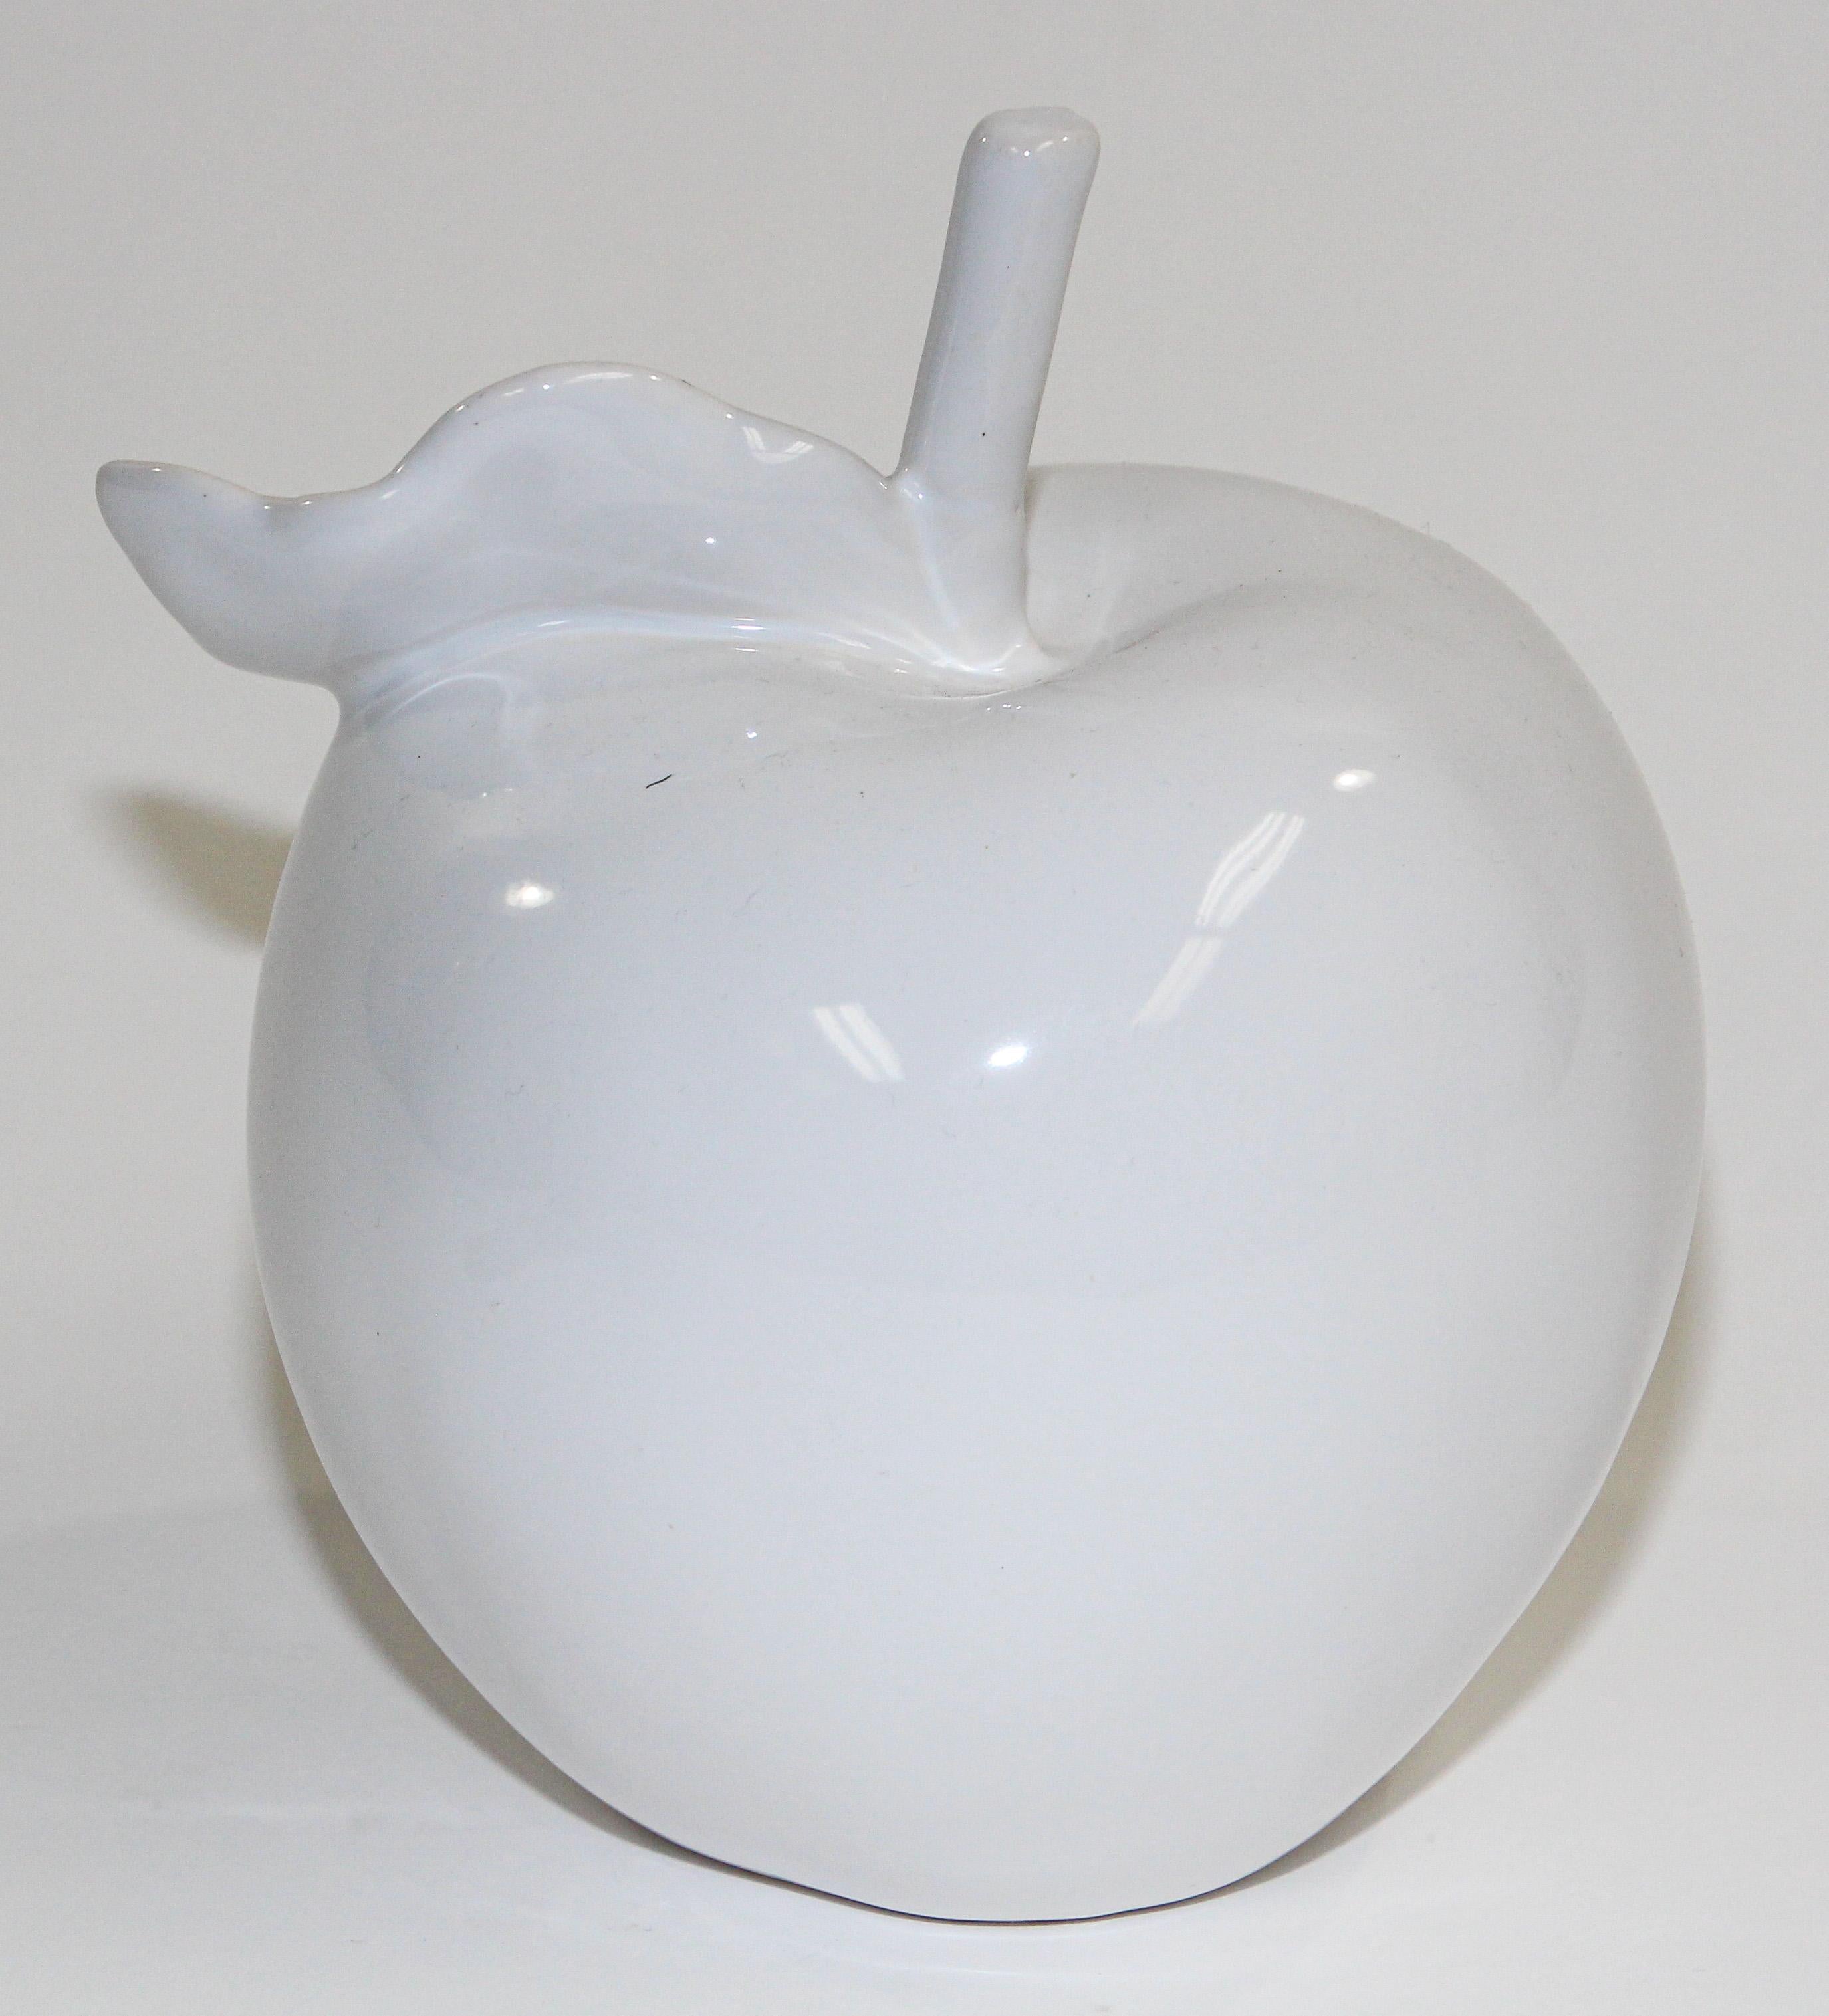 Organic Modern classic minimalist white porcelain apple sculpture.
The beauty of natural shape is on full display with this apple form that have graced still-life art for centuries. The apple is made of porcelain Blanc de Chine.
This contemporary